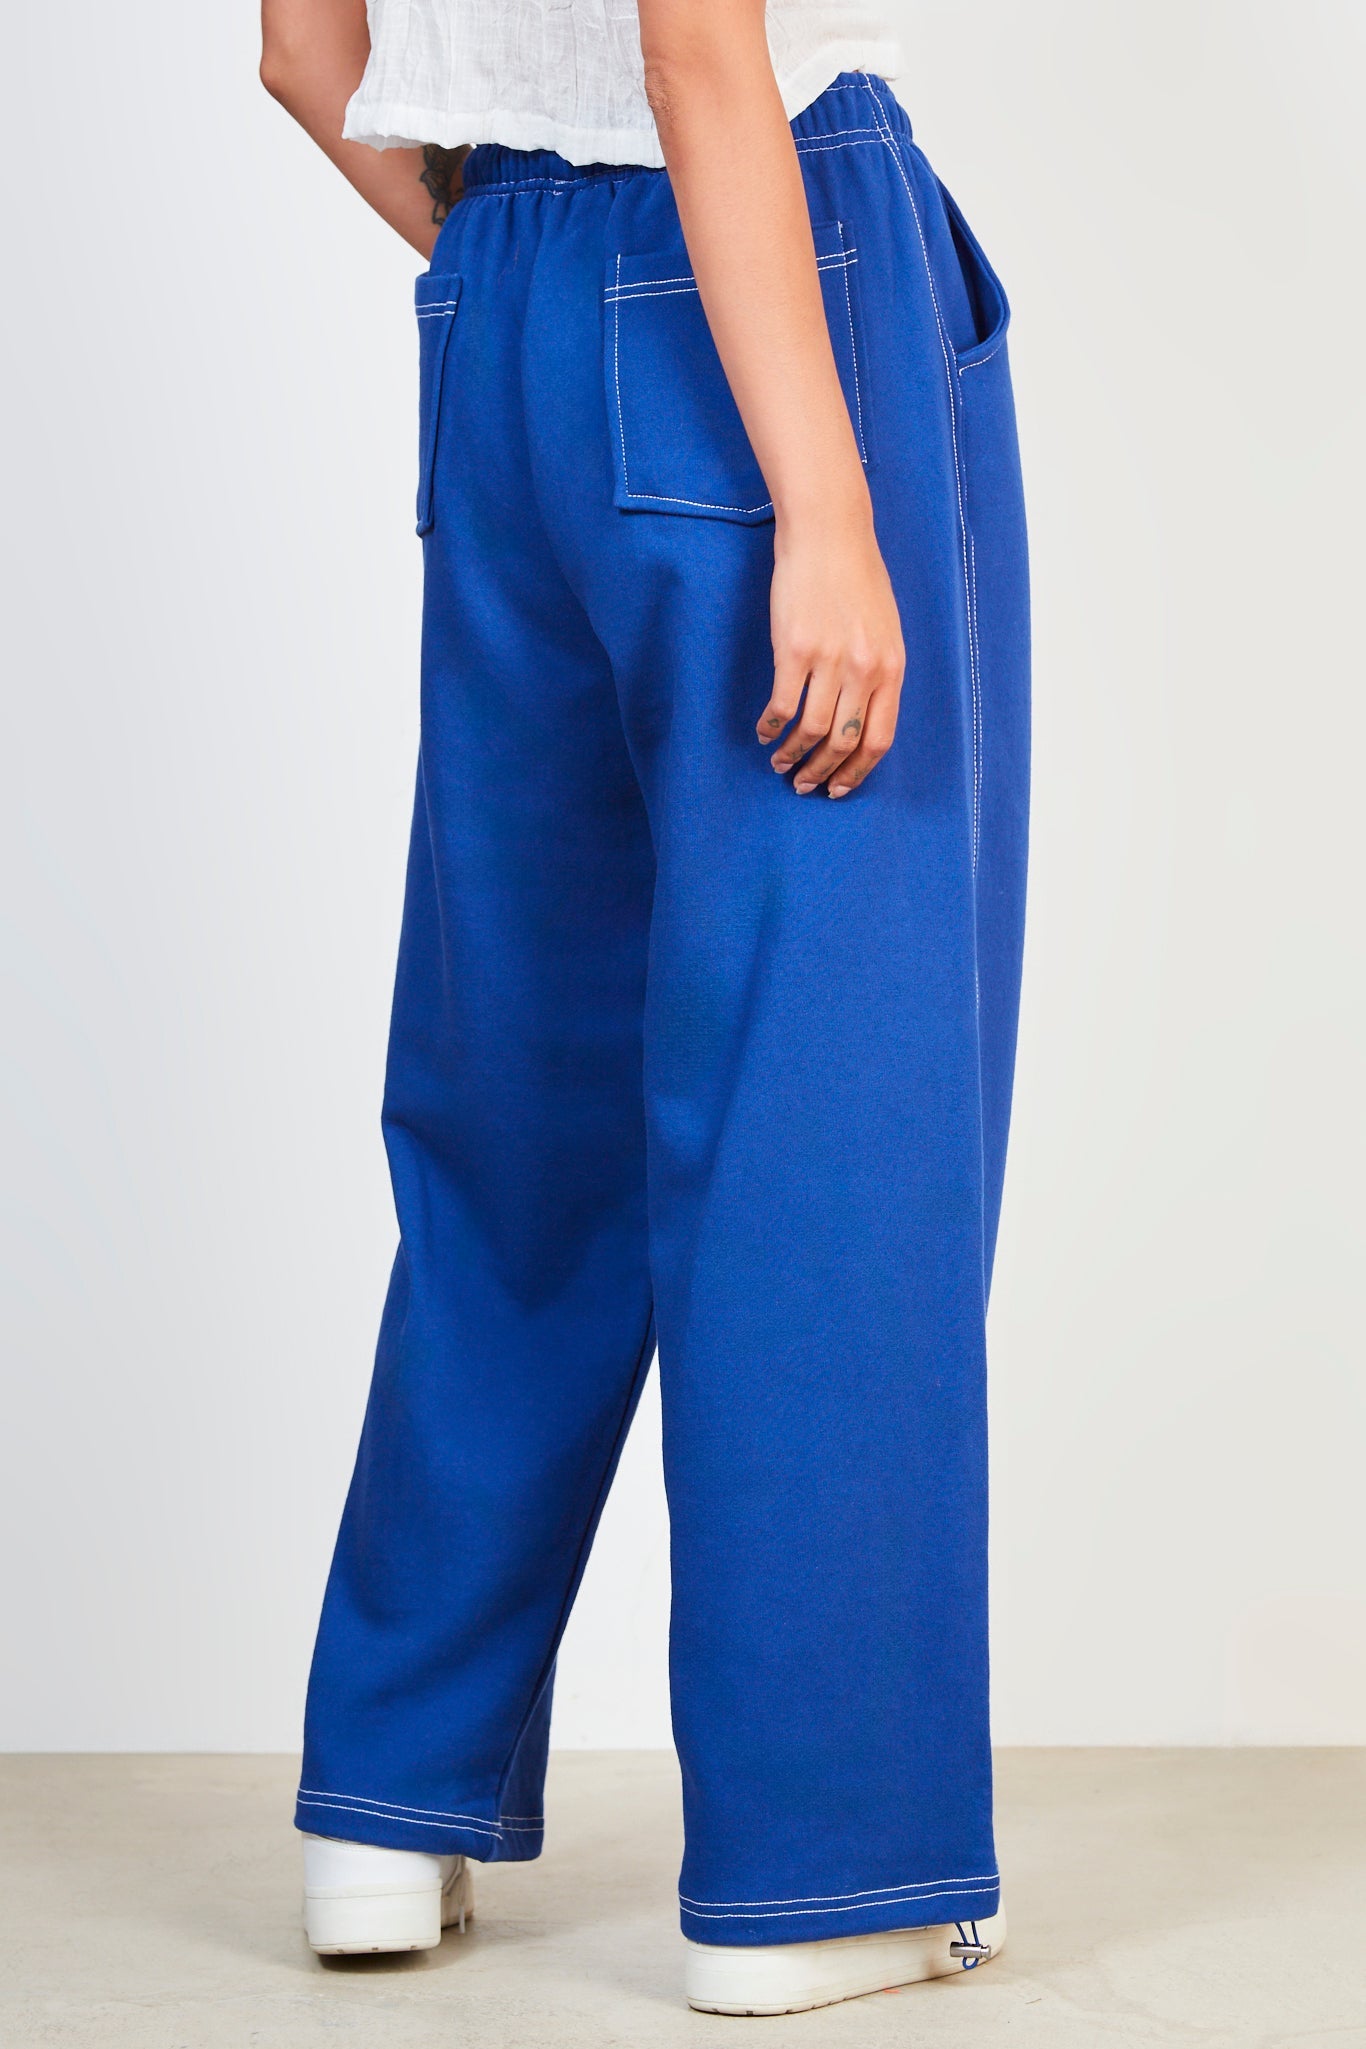 Blue and white contrast stitch sweatpants